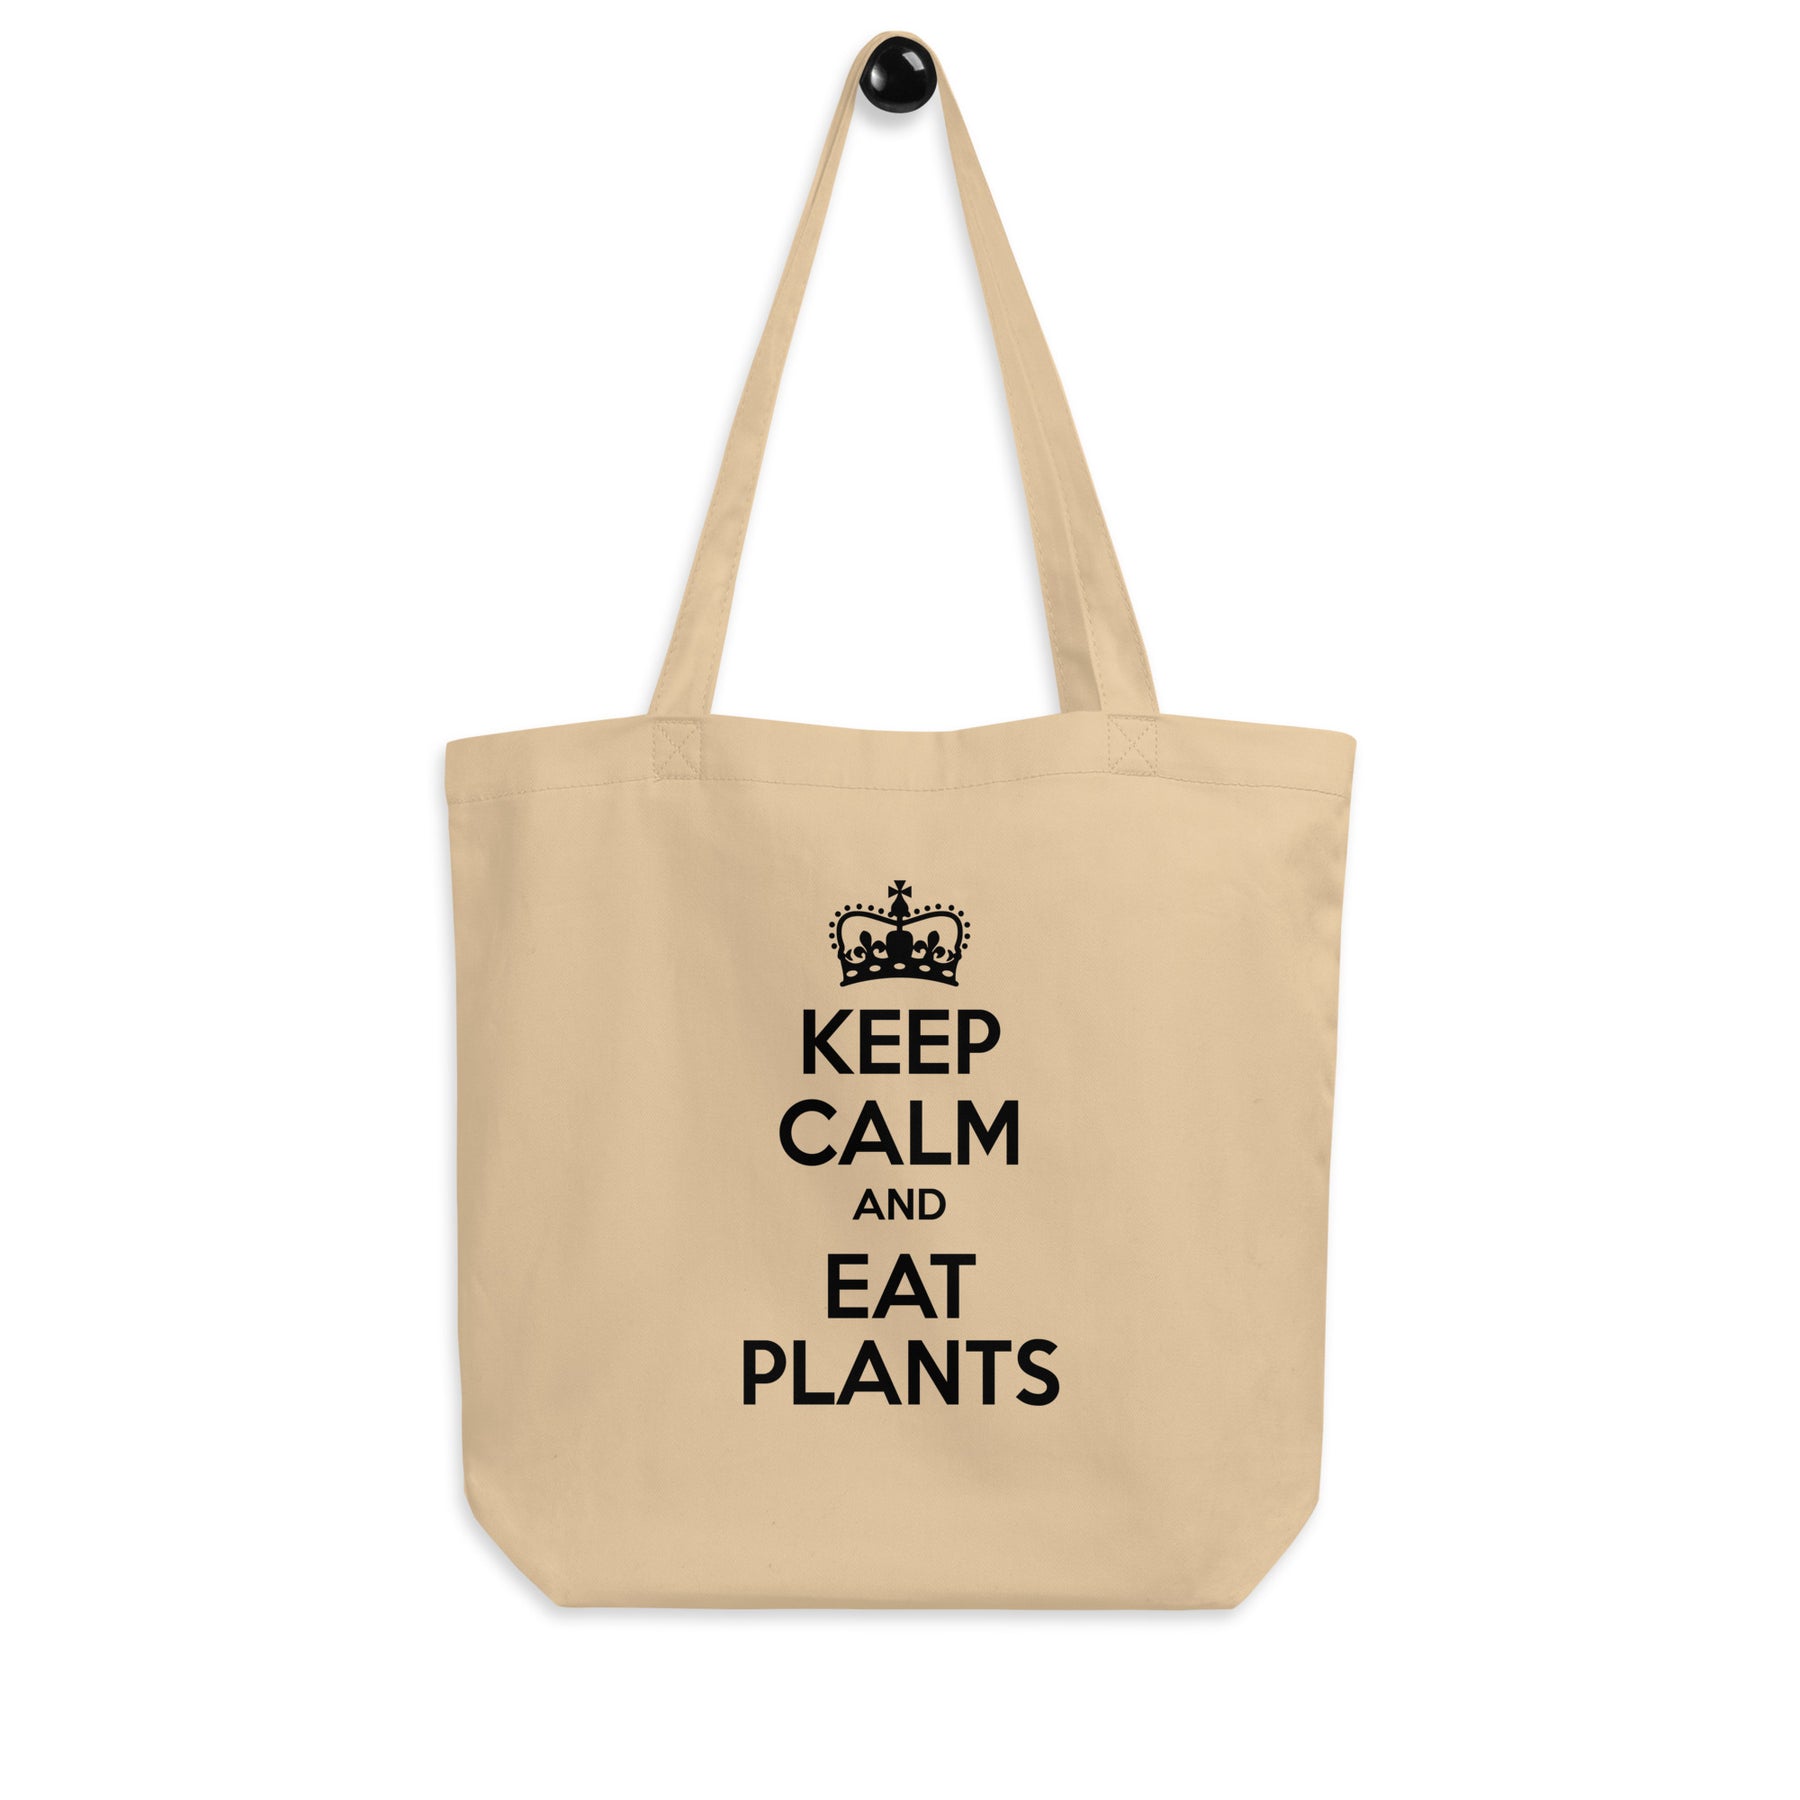 KEEP CALM PROTECT OUR PLANET Eco Tote Bag